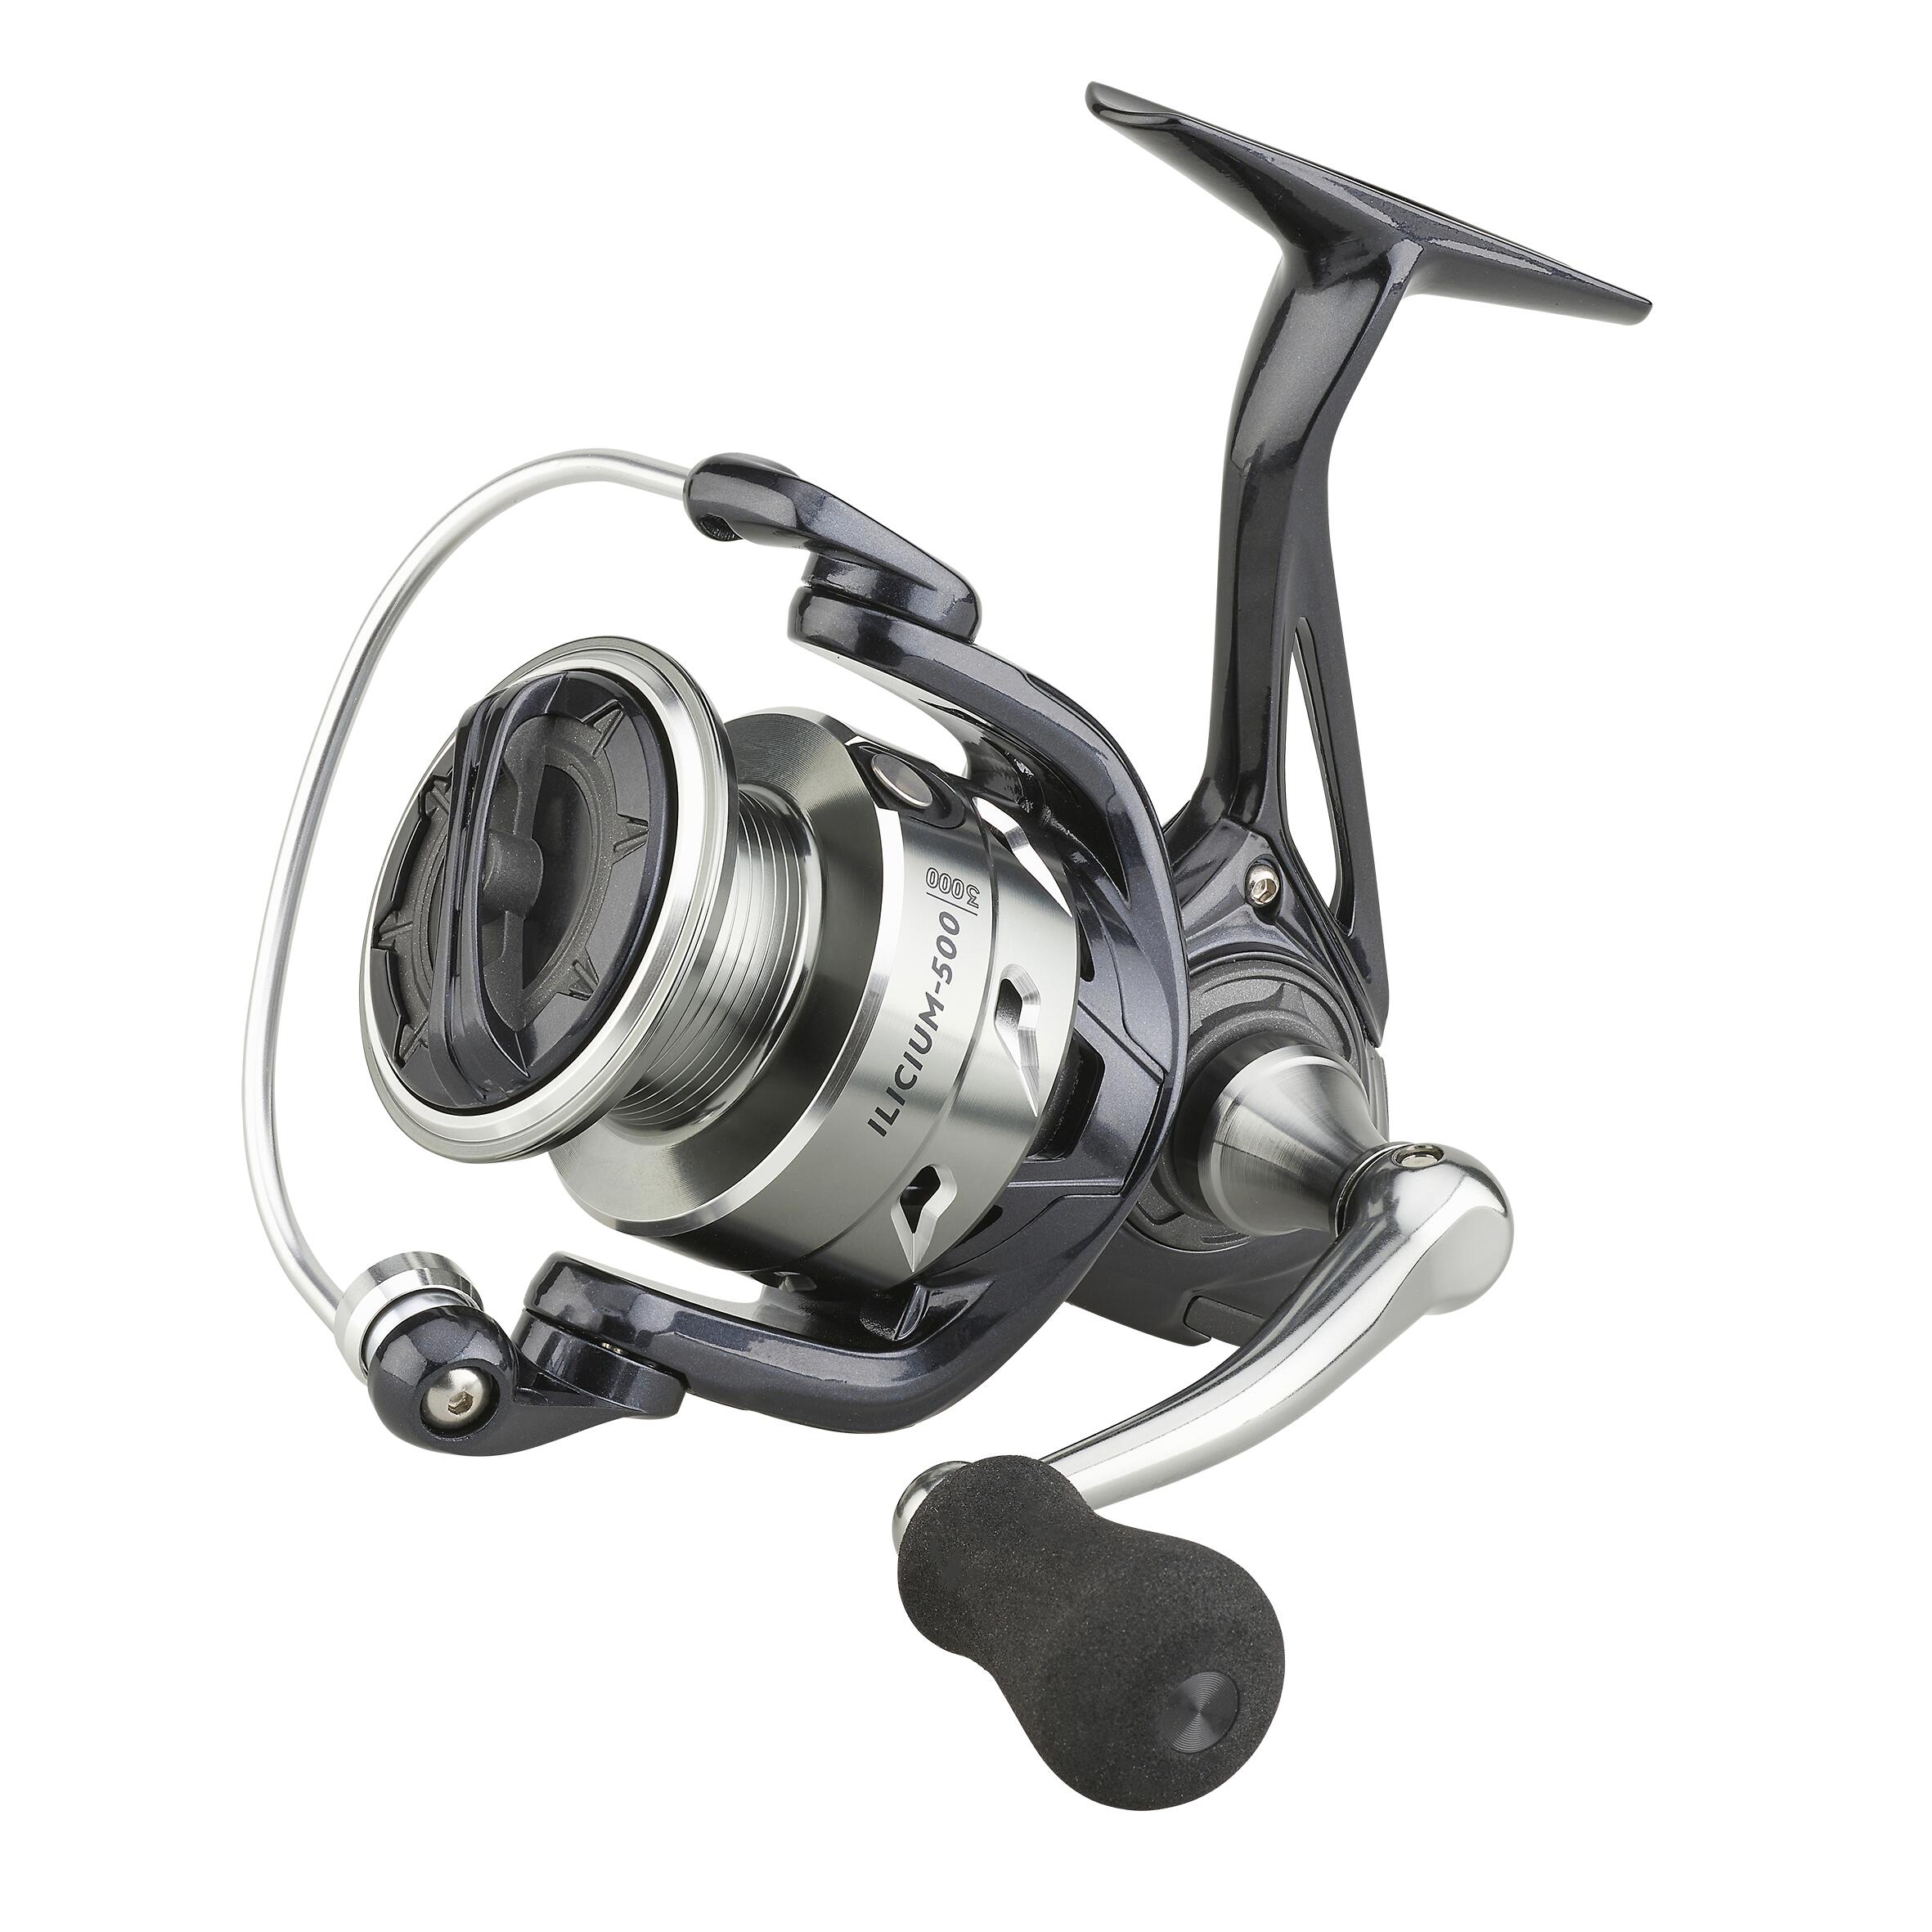 CAPERLAN Spinning reel for sea lure fishing ILICIUM-500 3000